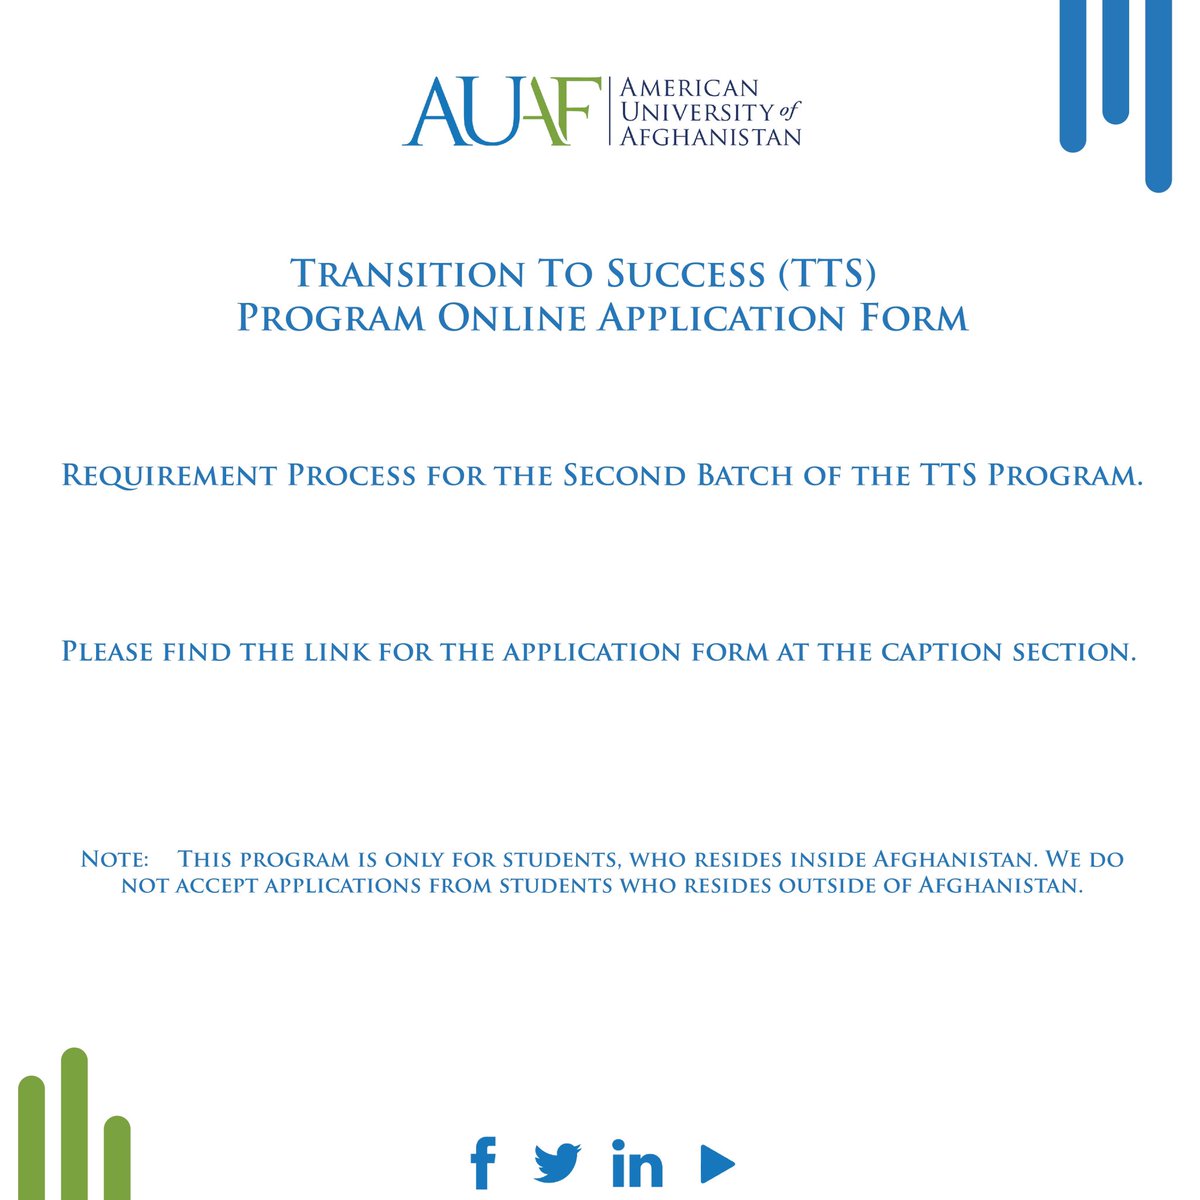 🚨 Announcement 🚨 AUAF is accepting applications for the 2nd batch of the successful TTS program. At the following link, you can learn about the requirements, fill, and submit your application for the TTS program. forms.gle/WqA7zexoBPZvwn